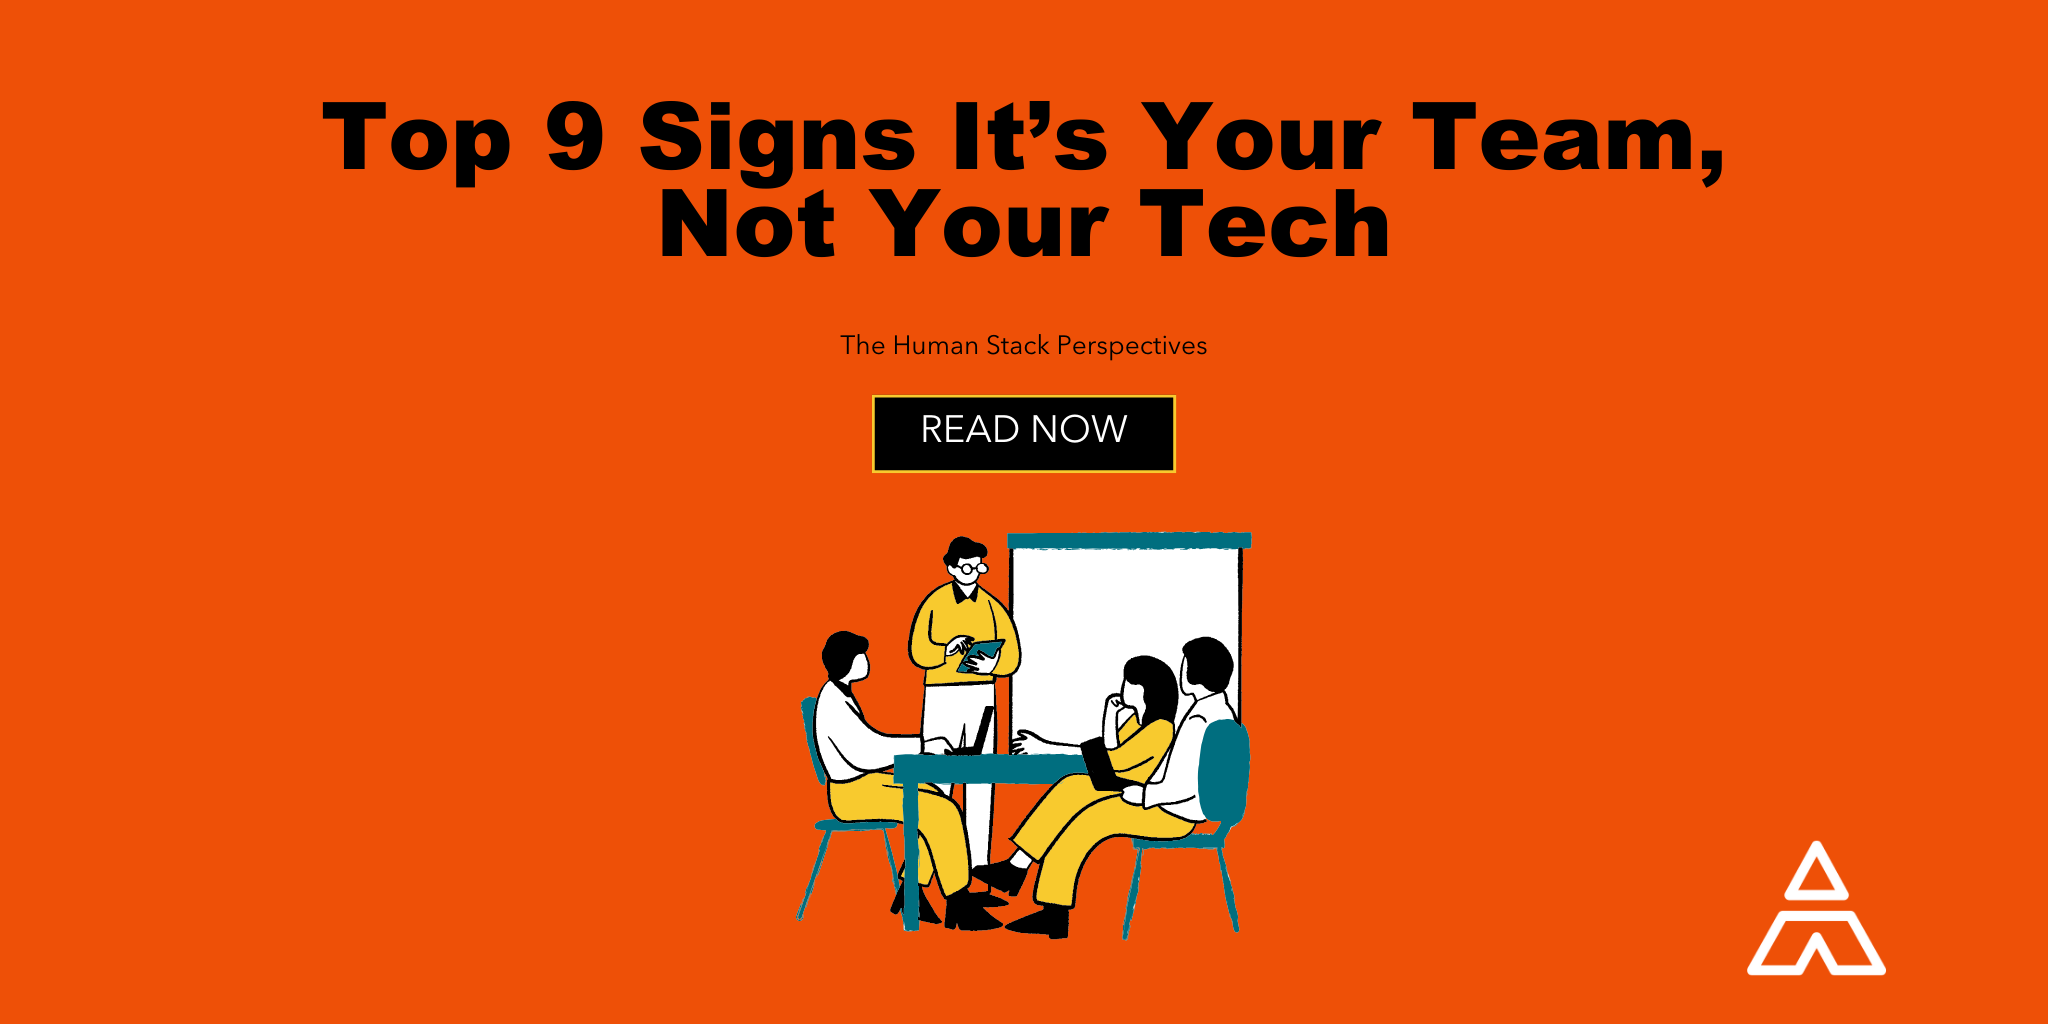 Top 9 Signs It’s Your Team, Not Your Tech